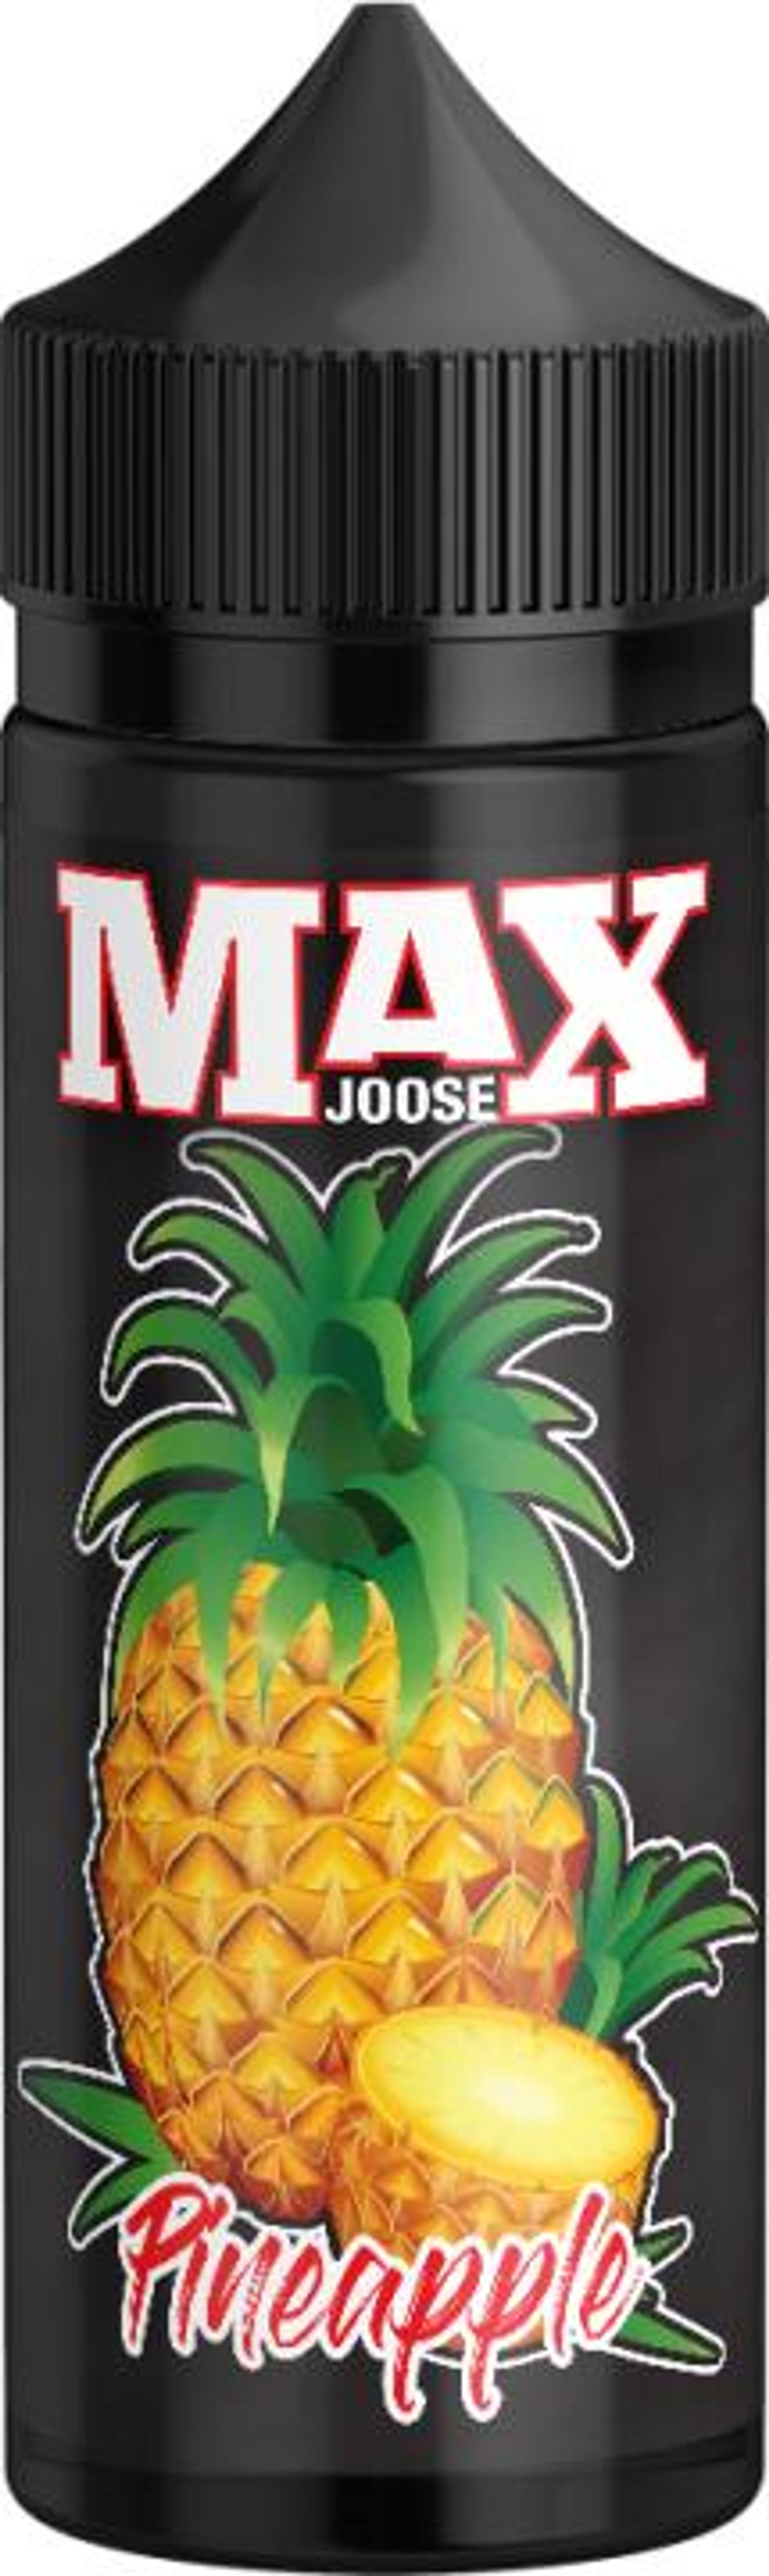 Image of Pineapple by Max Joose